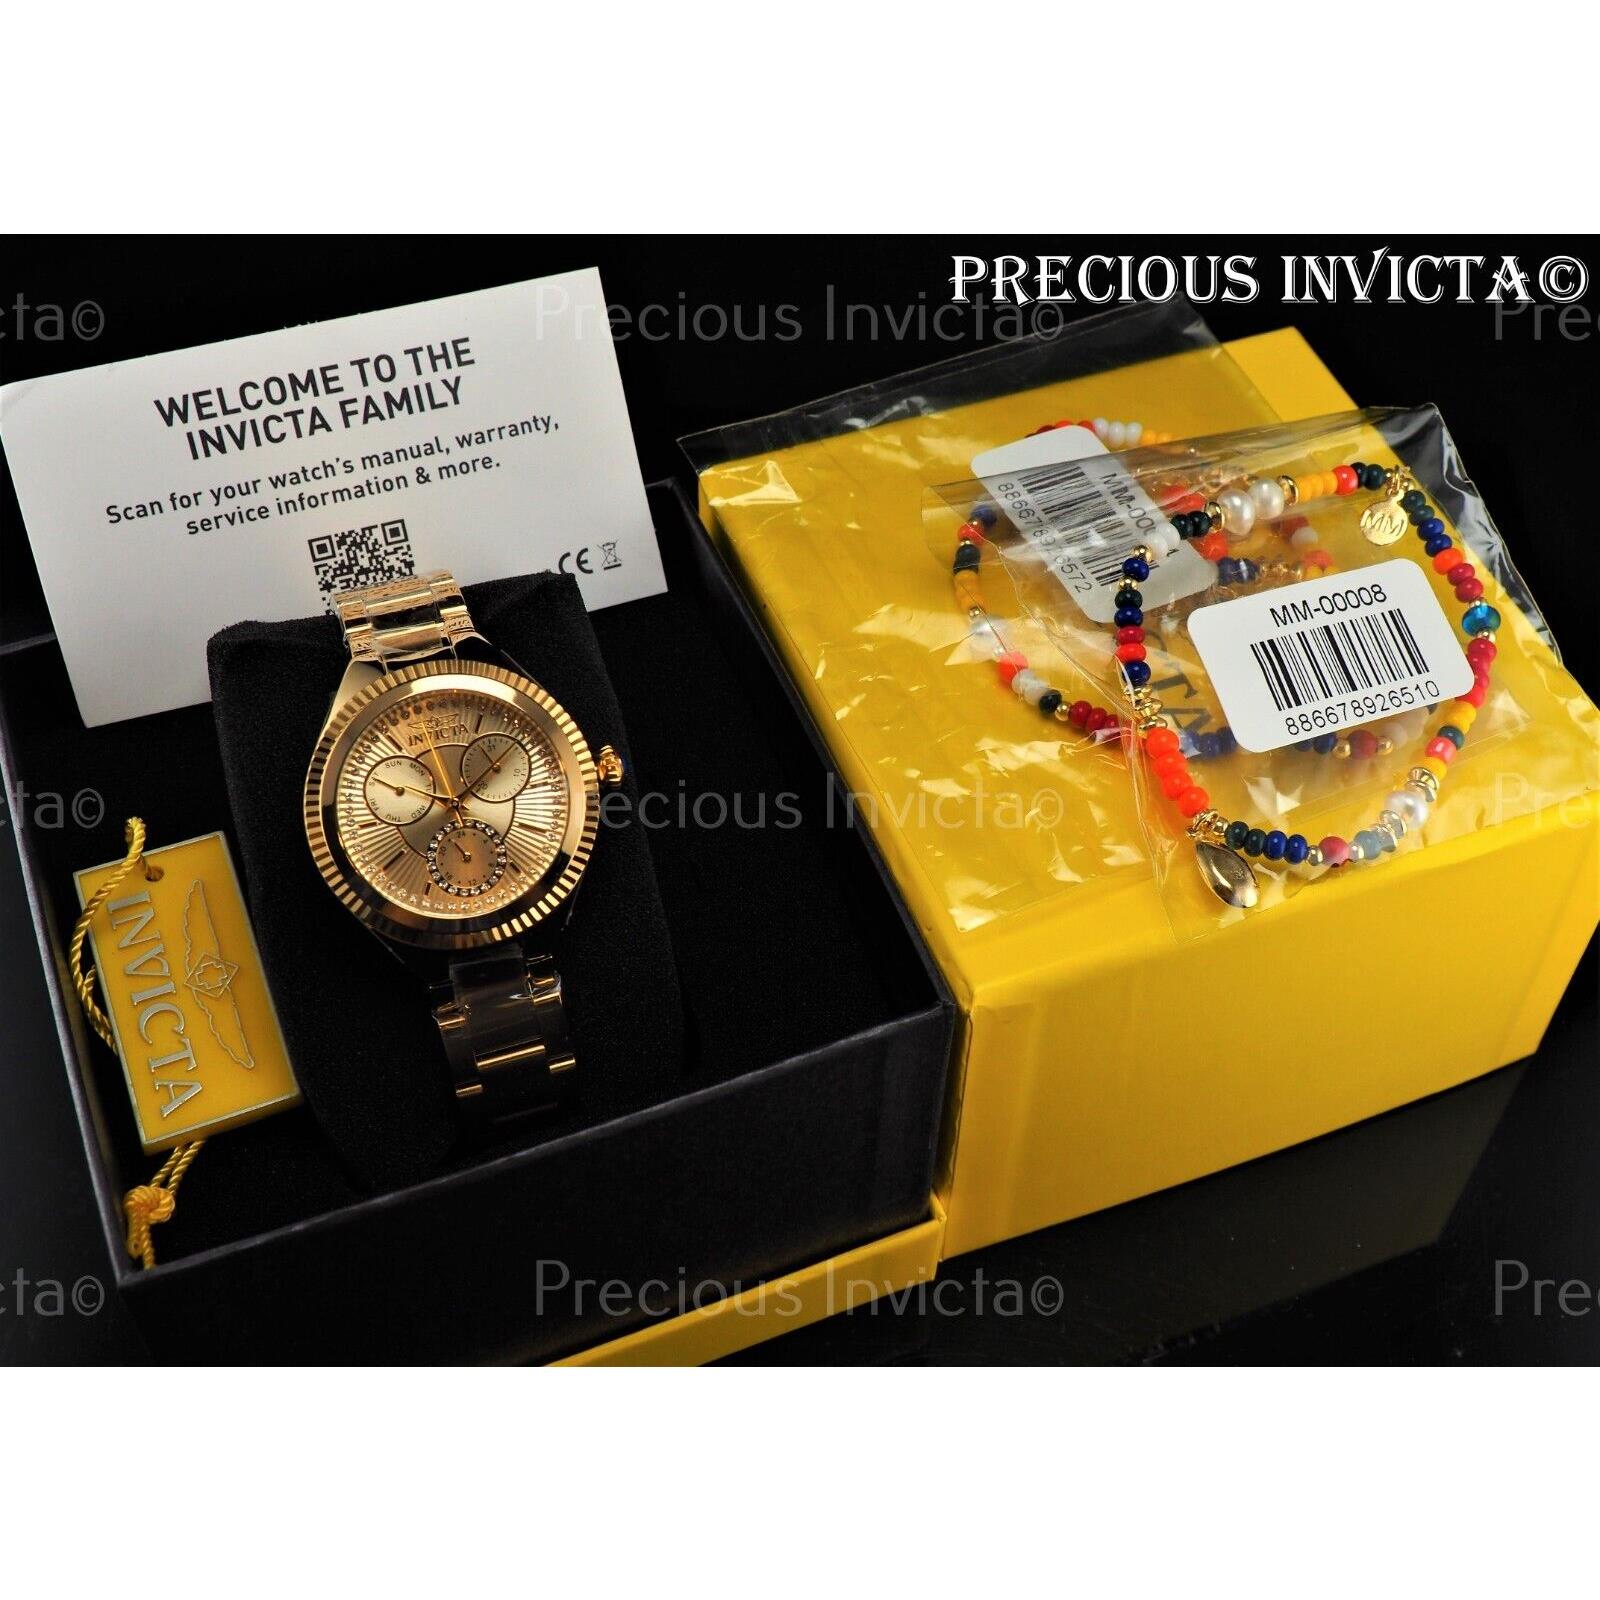 Invicta watch  - White Dial, Gold Tone Band, White and Gold Other Dial